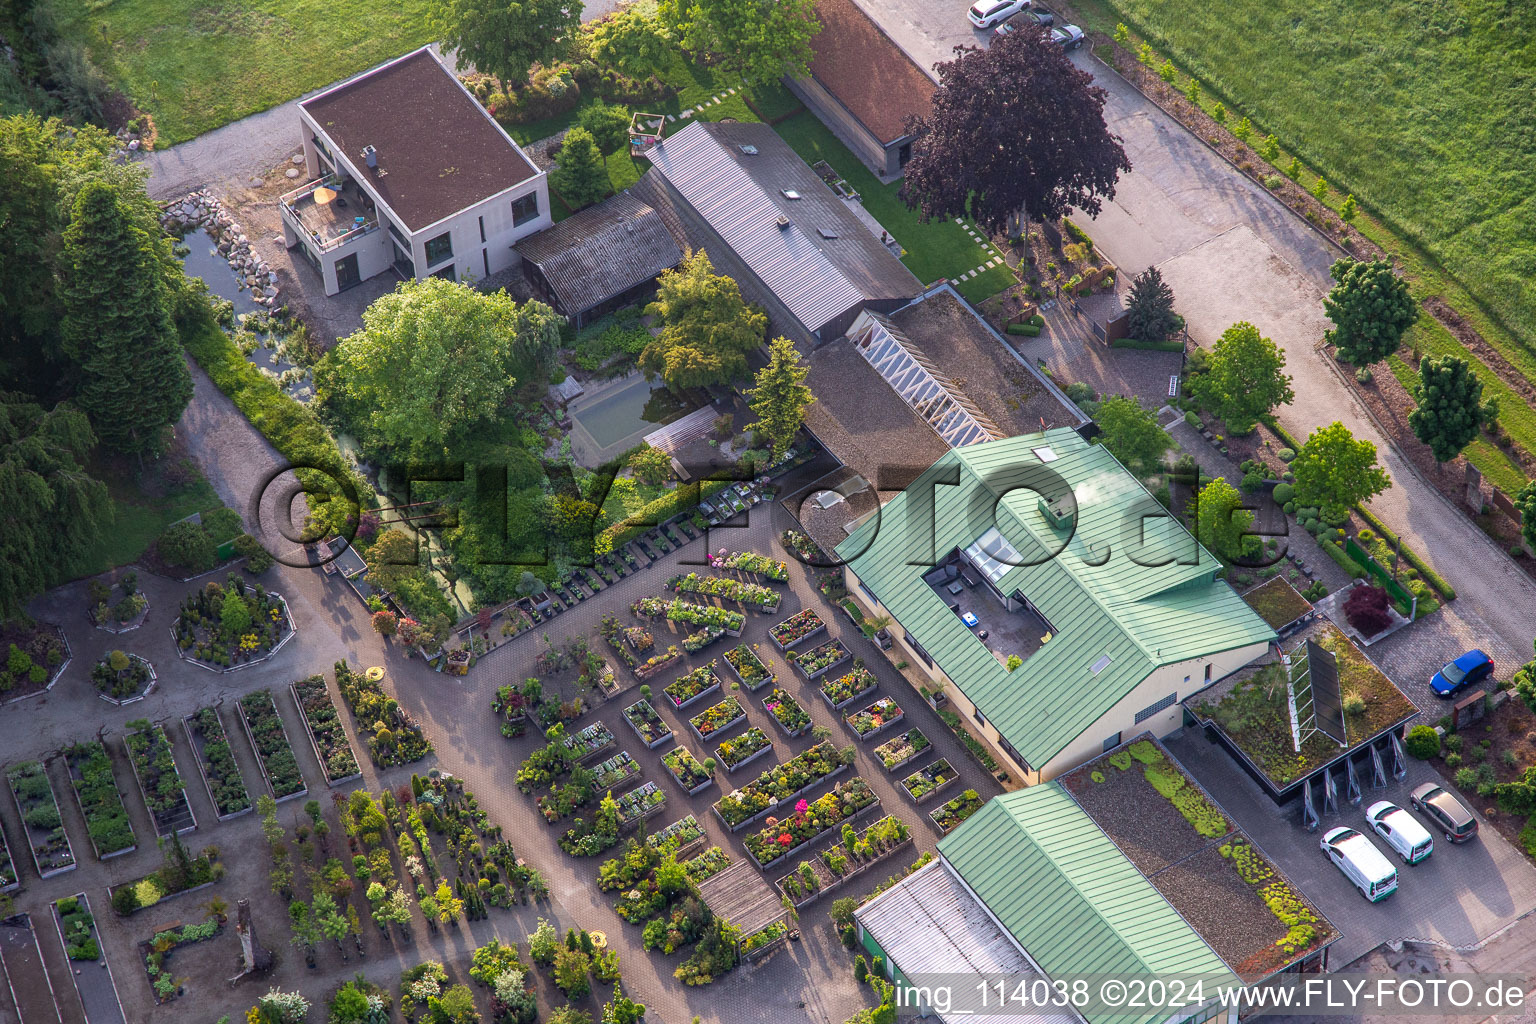 Aerial view of Building of Store plant market Bienwald-Nursery Greentec GmbH in Berg (Pfalz) in the state Rhineland-Palatinate, Germany